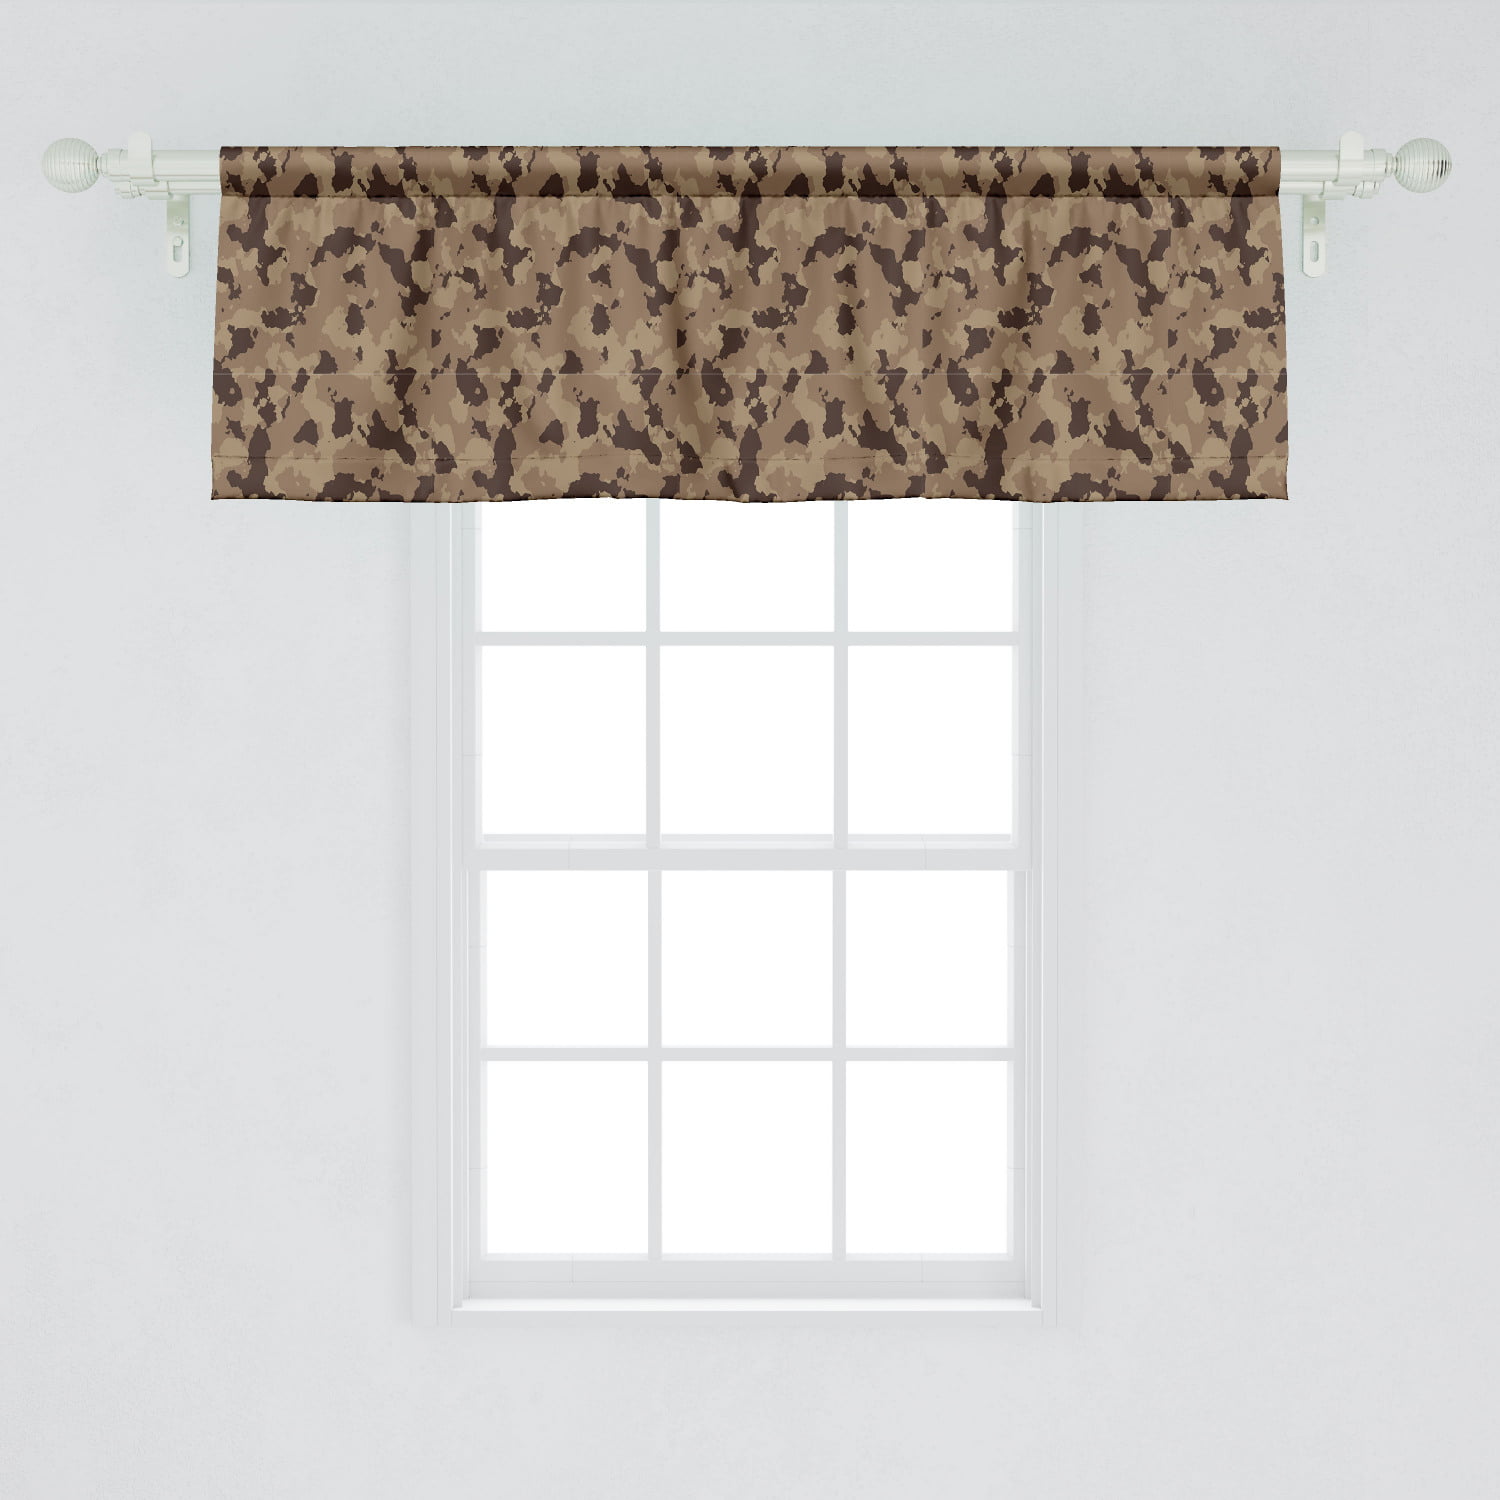 Ambesonne Camouflage Window Valance, Earth Tones Repetitive Camo ...